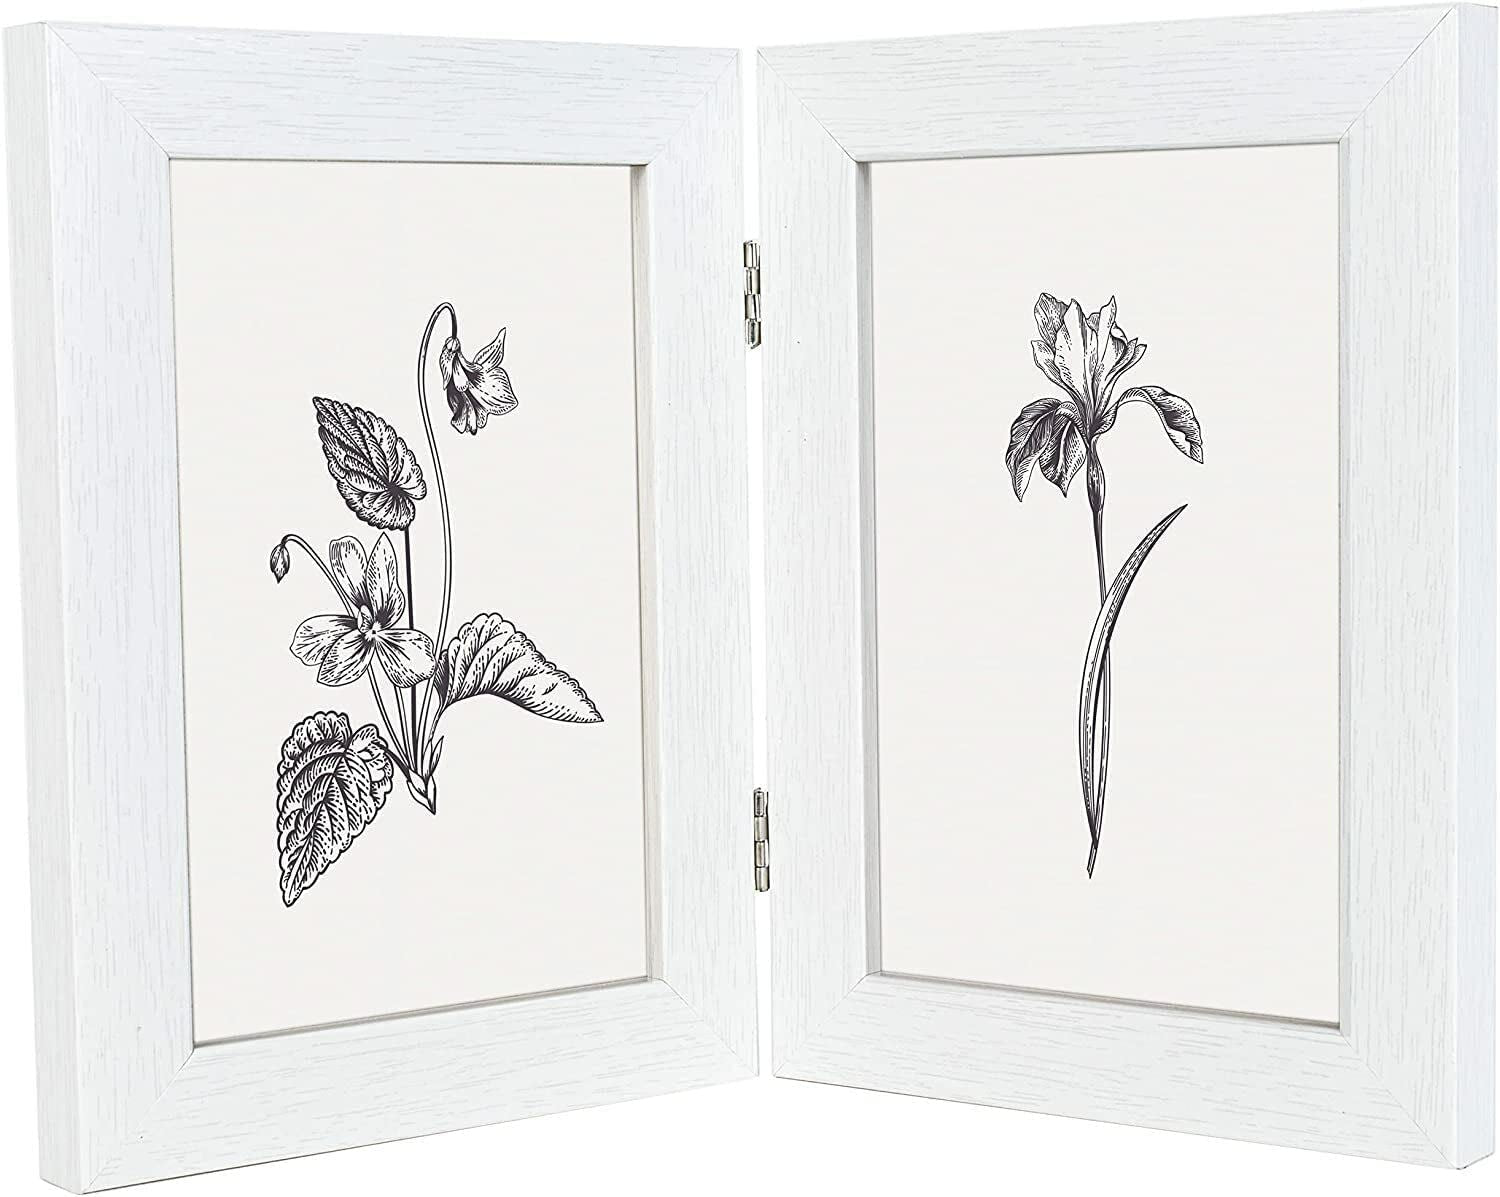 Double Photo Picture Frame 6 X 4, White, Holds 2 Standard Photographs, Freestanding, Twin Hinged 6X4" 10 X 15 Cm Picture Frames